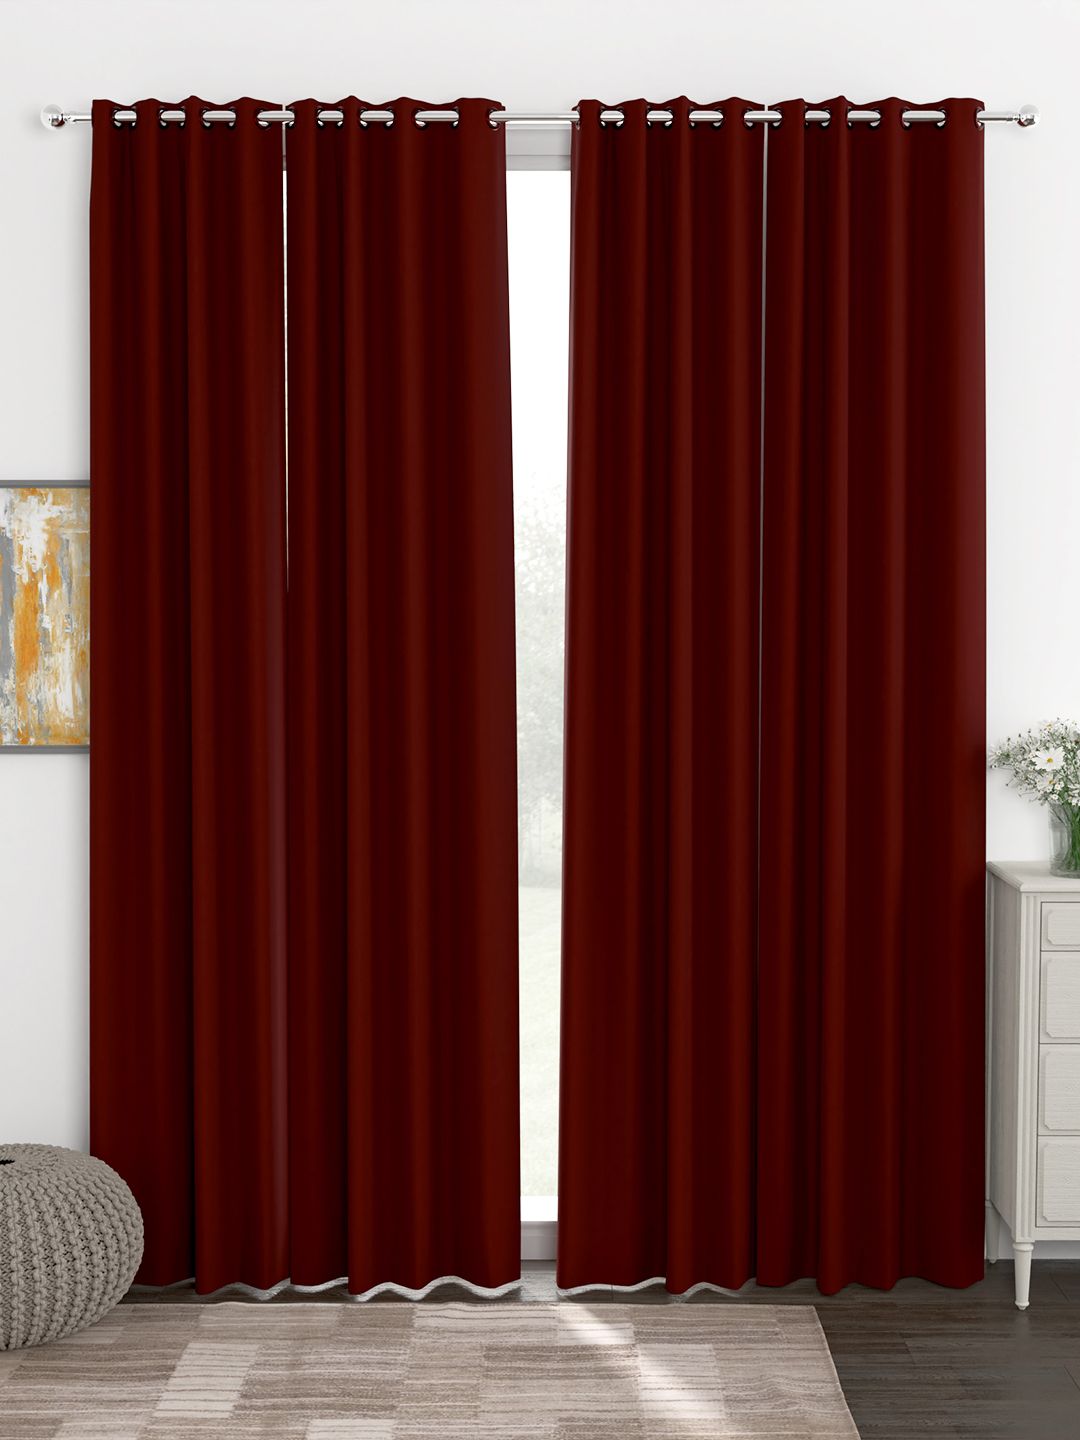 Story@Home Faux Silk Solid 300GSM Maroon Room Darkening Blackout Door Curtain - Set of 4 Price in India